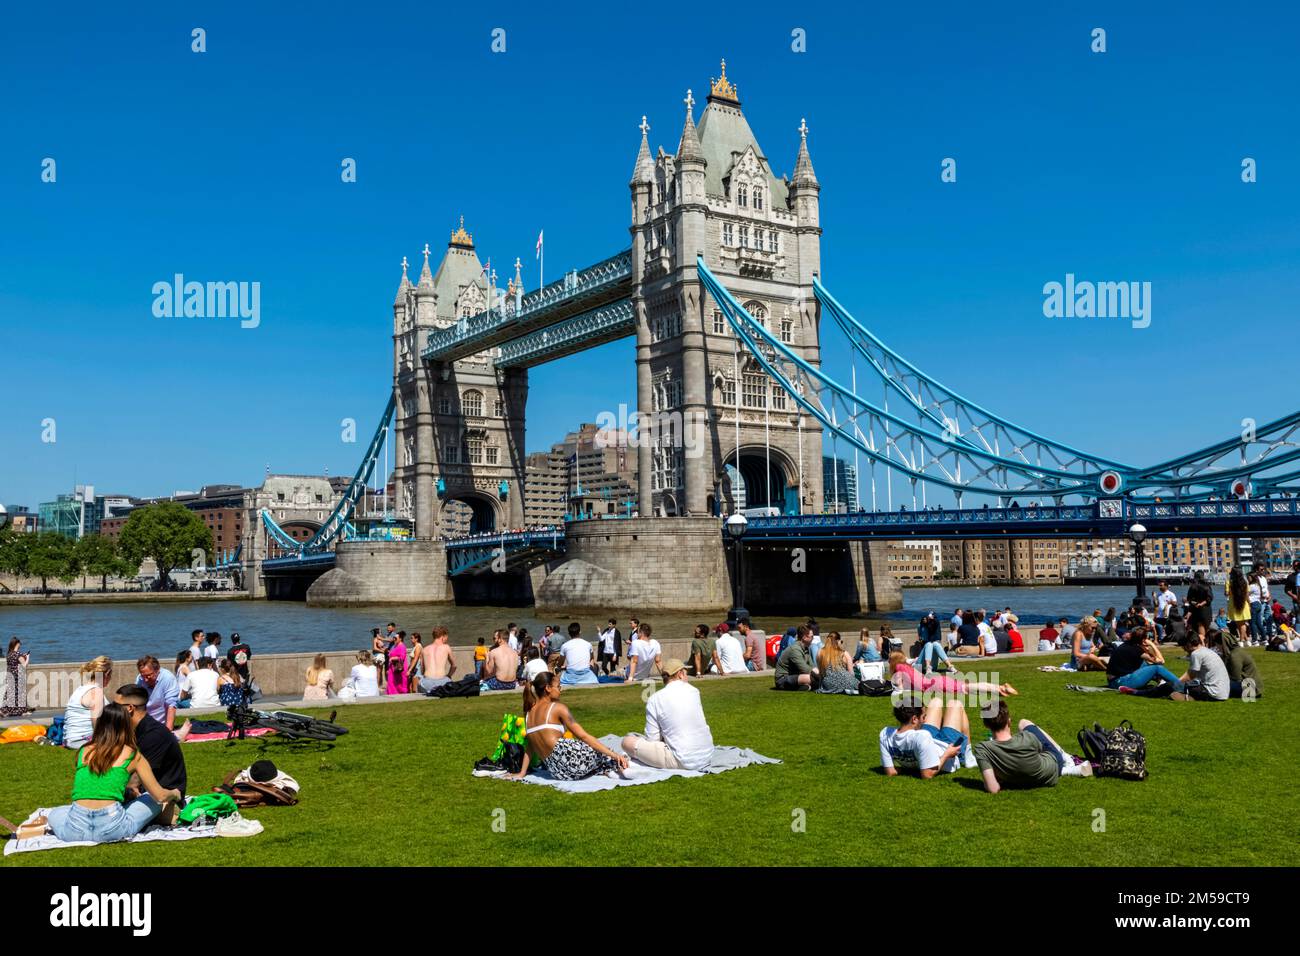 Tower Bridge with People Relaxing on Grass in Foreground, London, England *** Local Caption ***  UK,United Kingdom,Great Britain,Britain,British,Engli Stock Photo